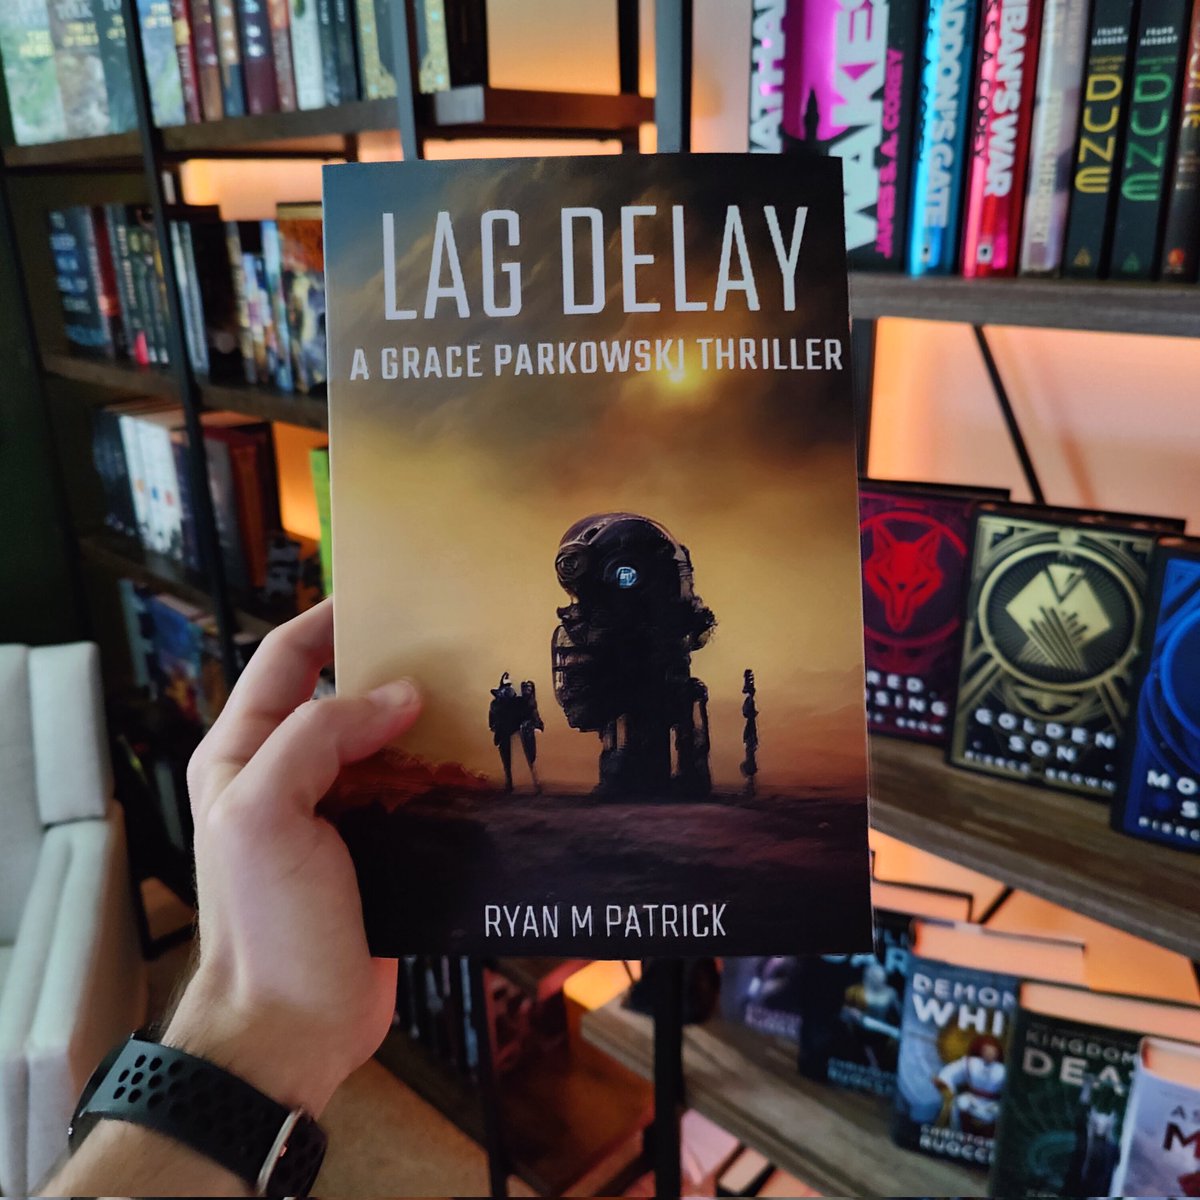 Book mail from @ryanpatrickauth with Lag Delay 📬 A NASA mission gone wrong.... This is a techno thriller that looks right up my alley. Thanks again for sending this my way 🙏